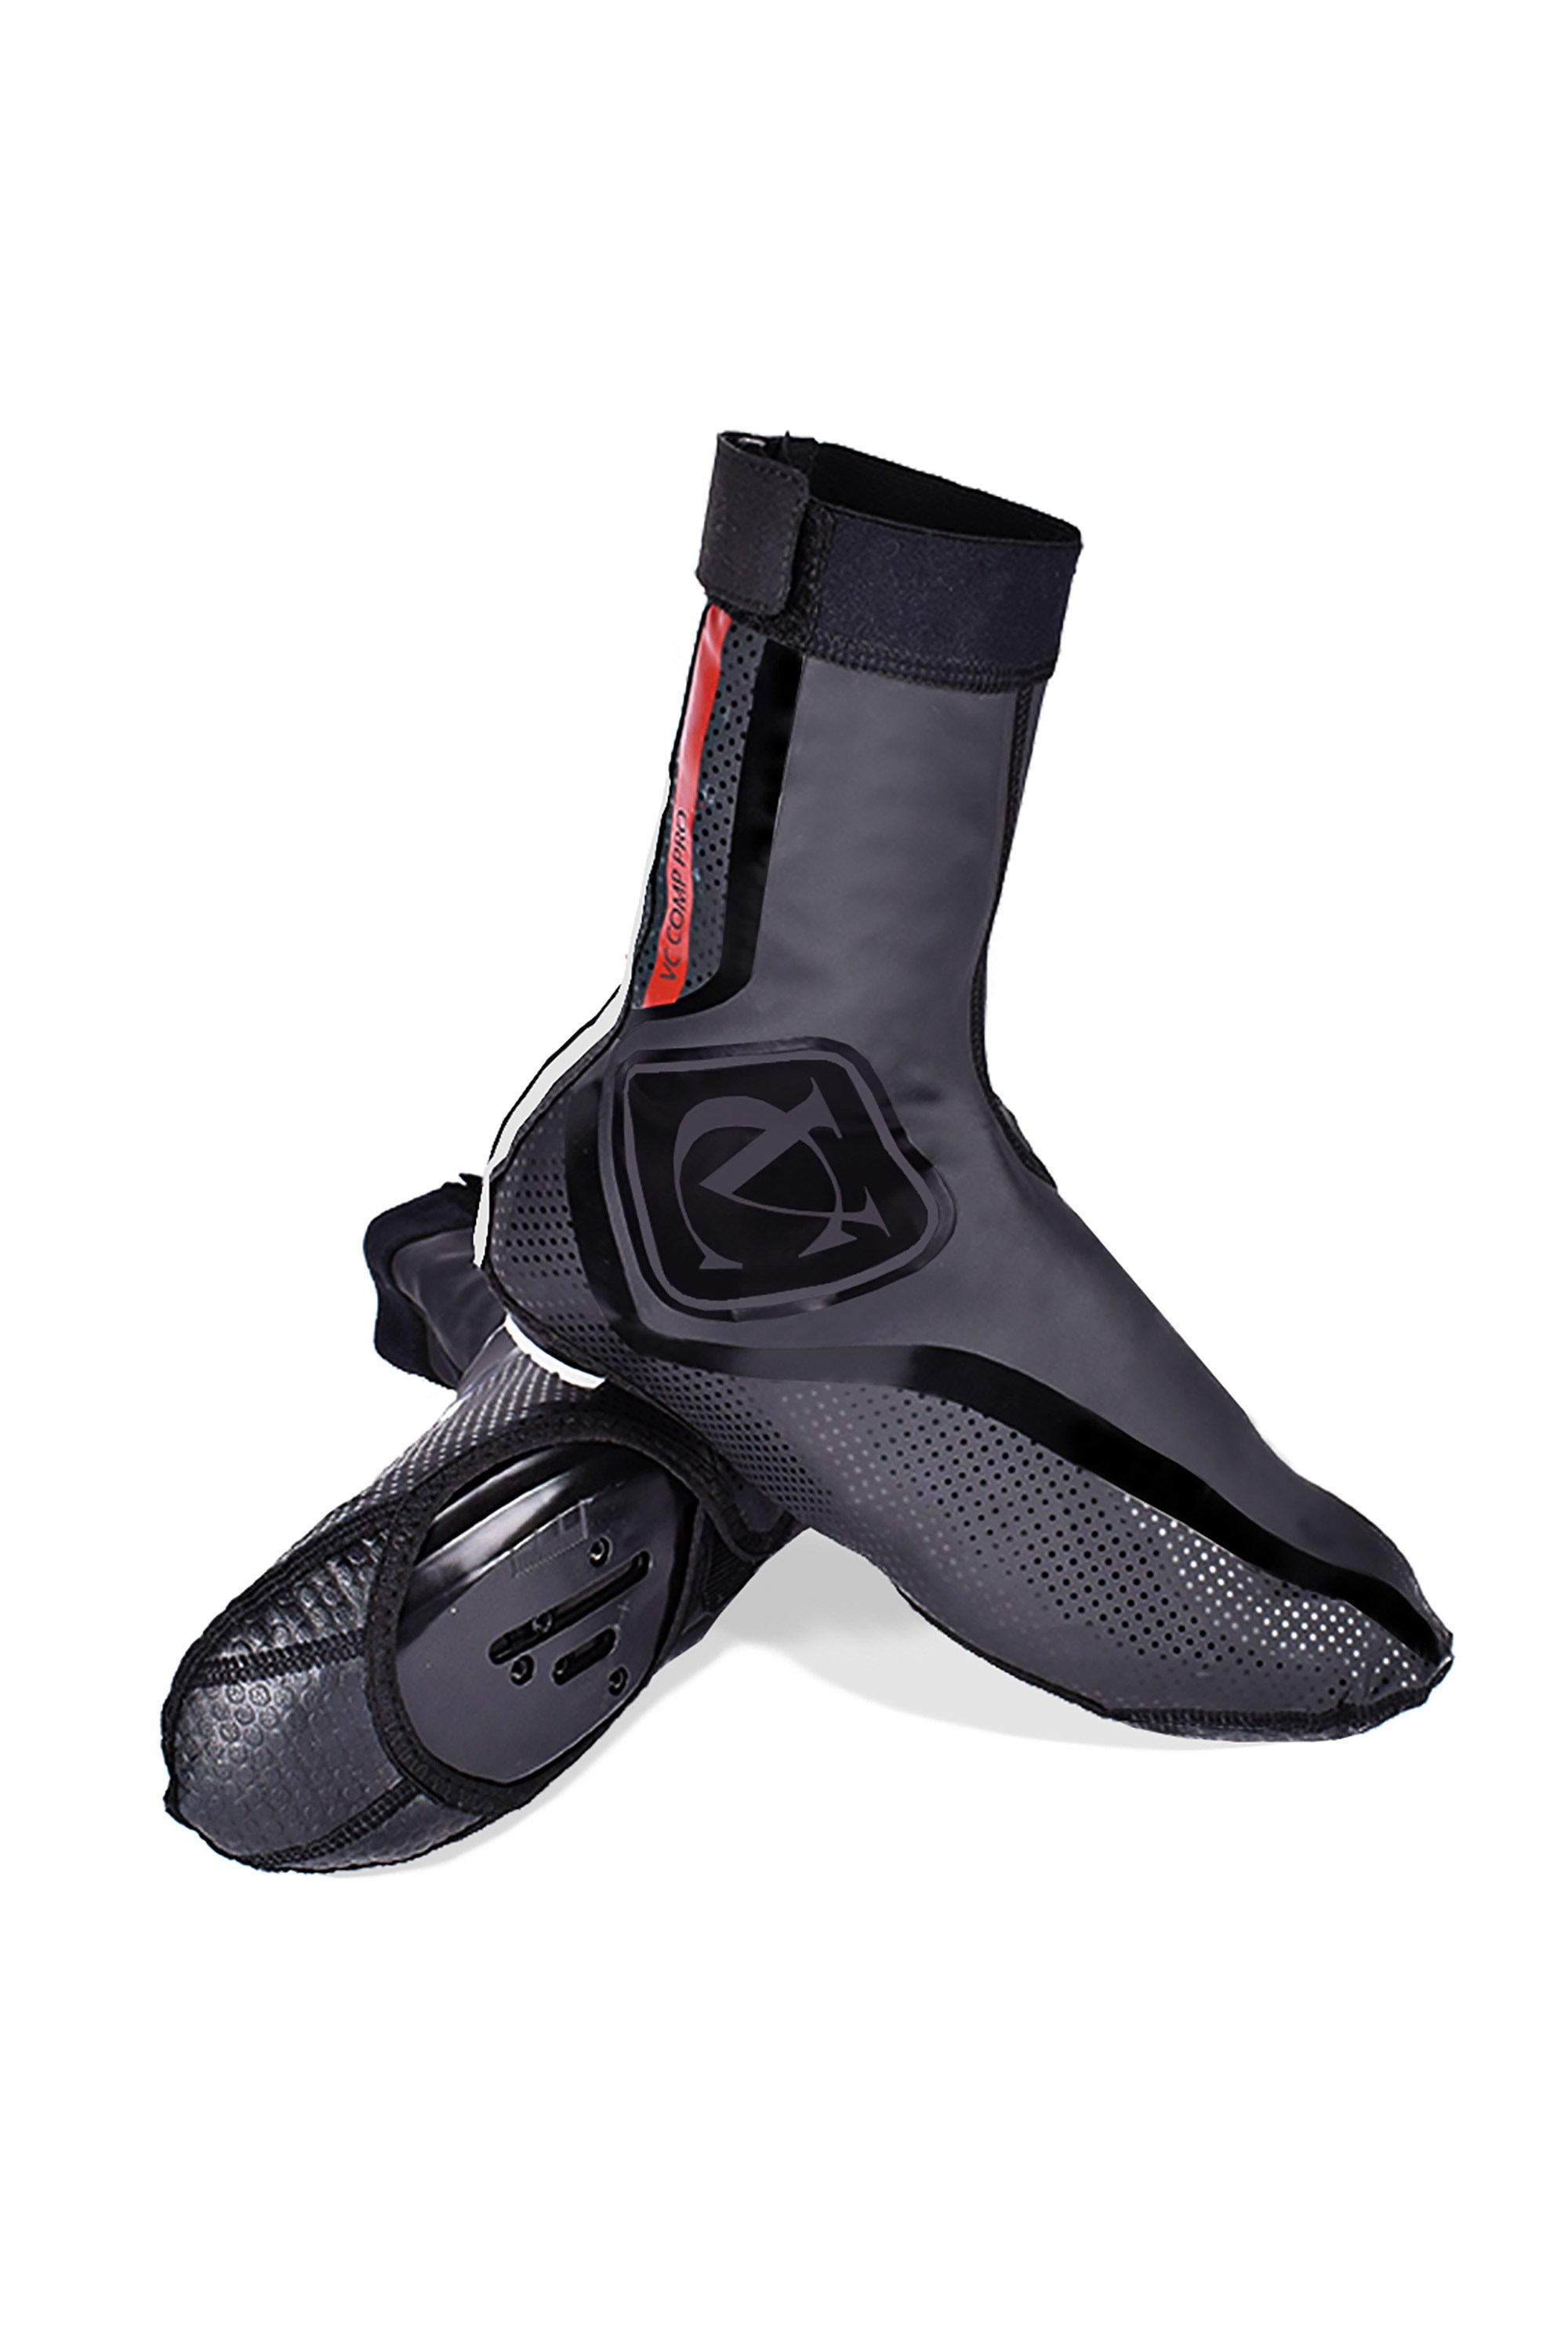 Vc Comp Pro Cycling Reflective Overshoes -